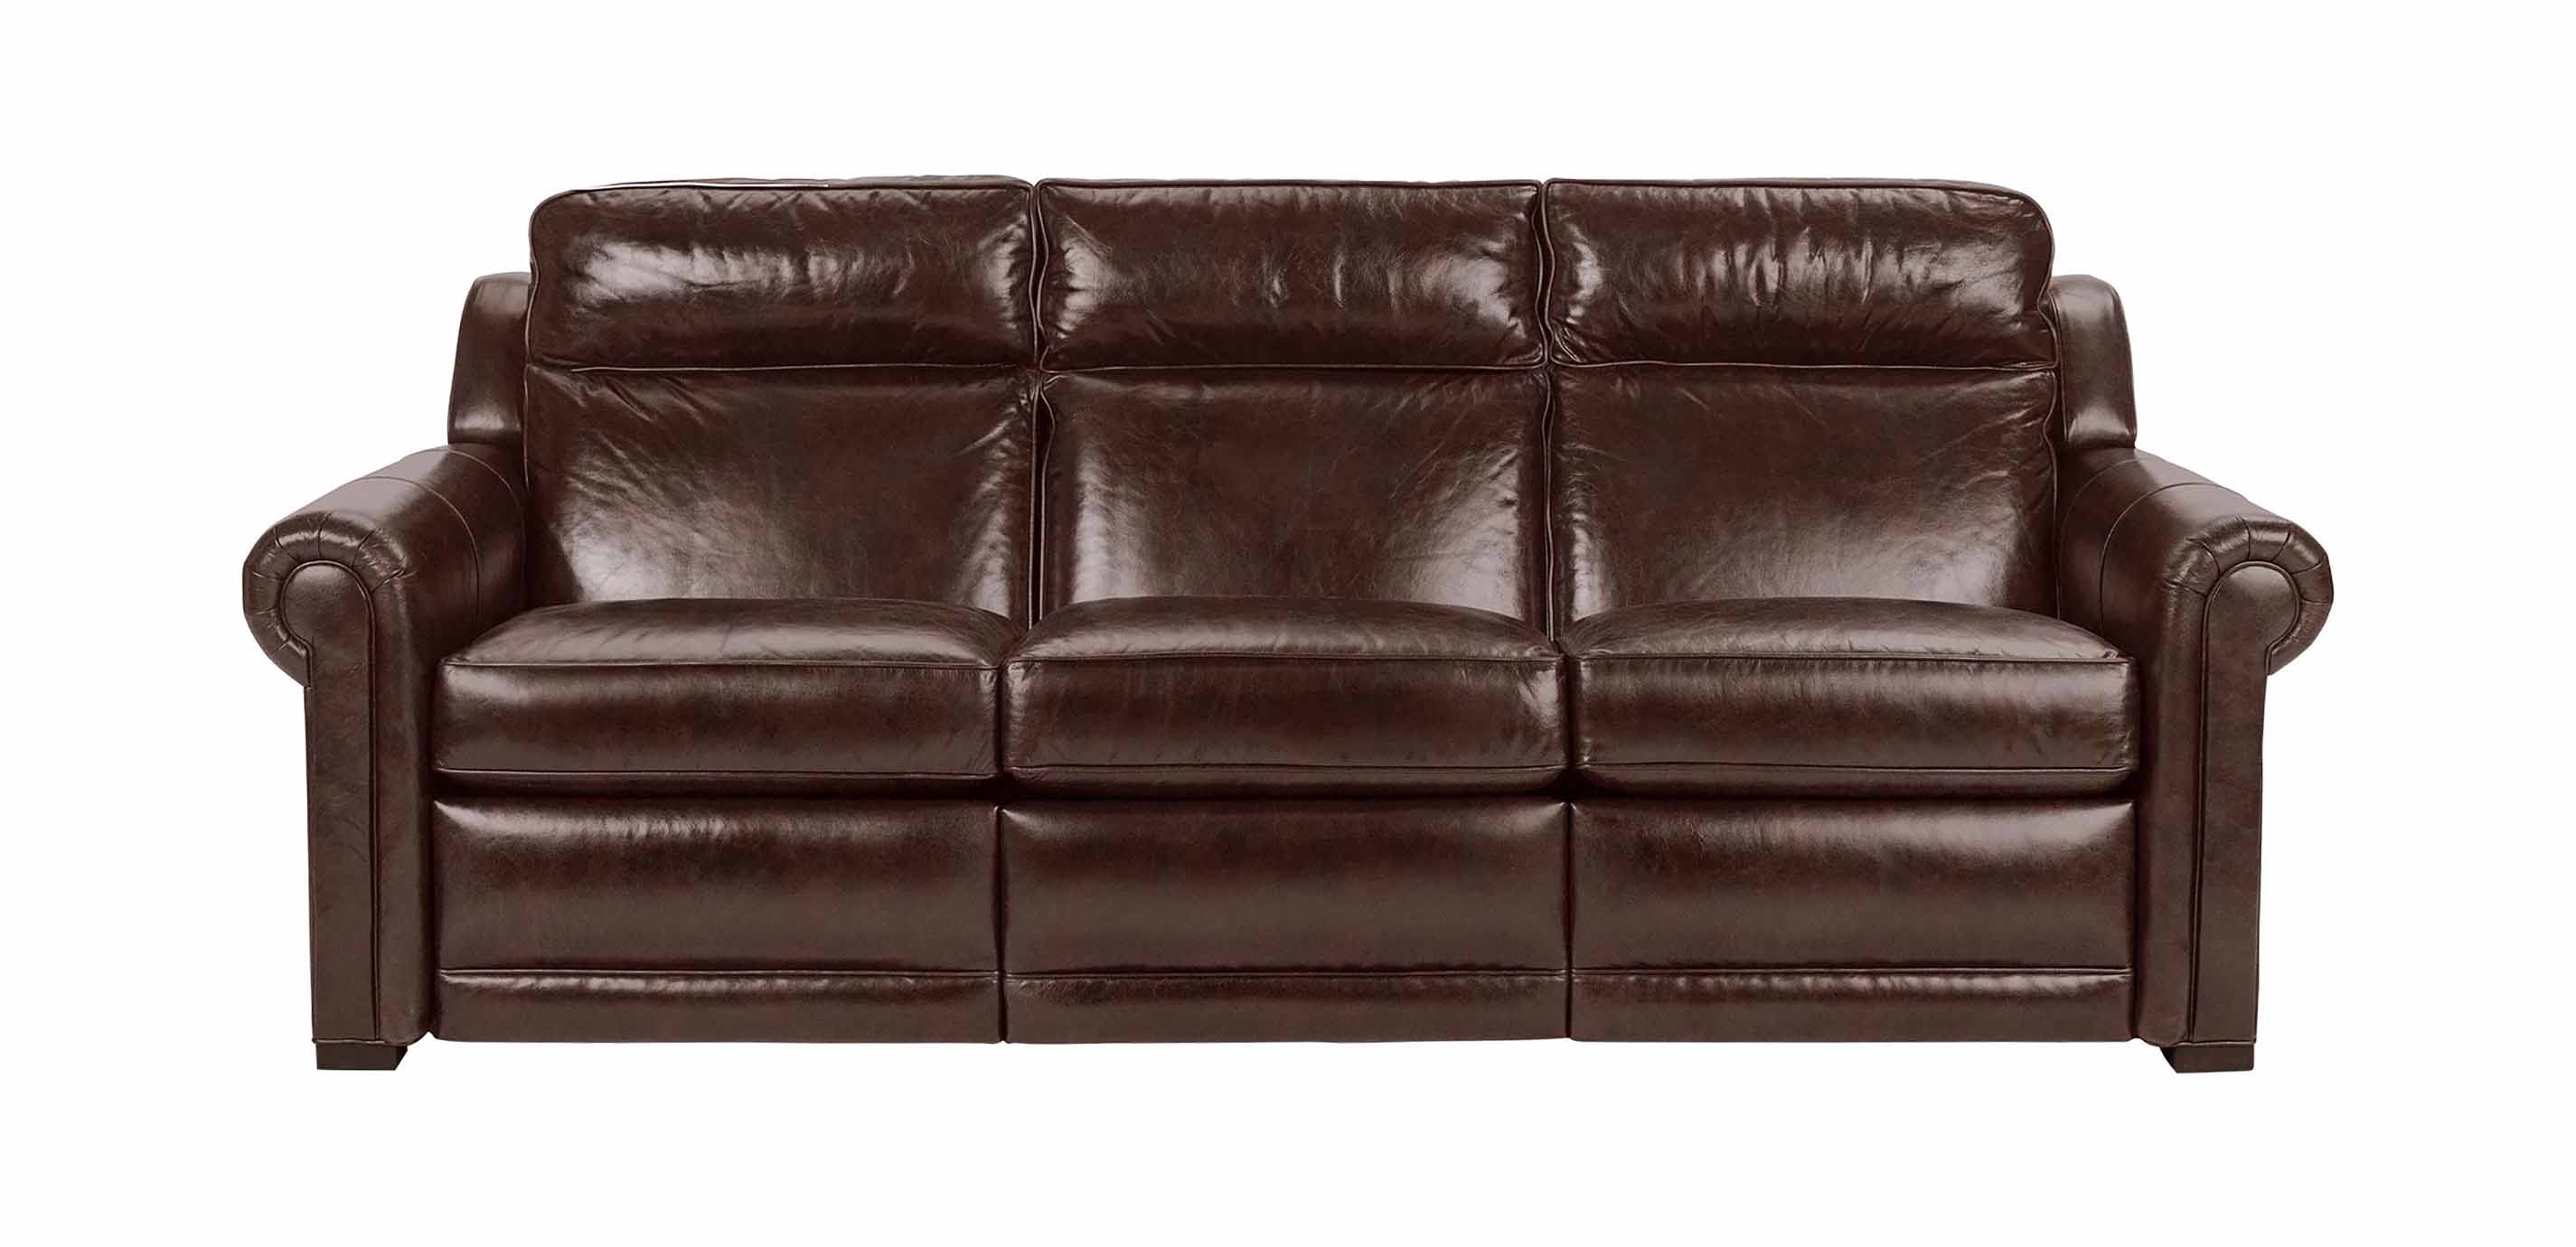 Johnston Roll Arm Leather Incliner Sofa, Ethan Allen Leather Couch